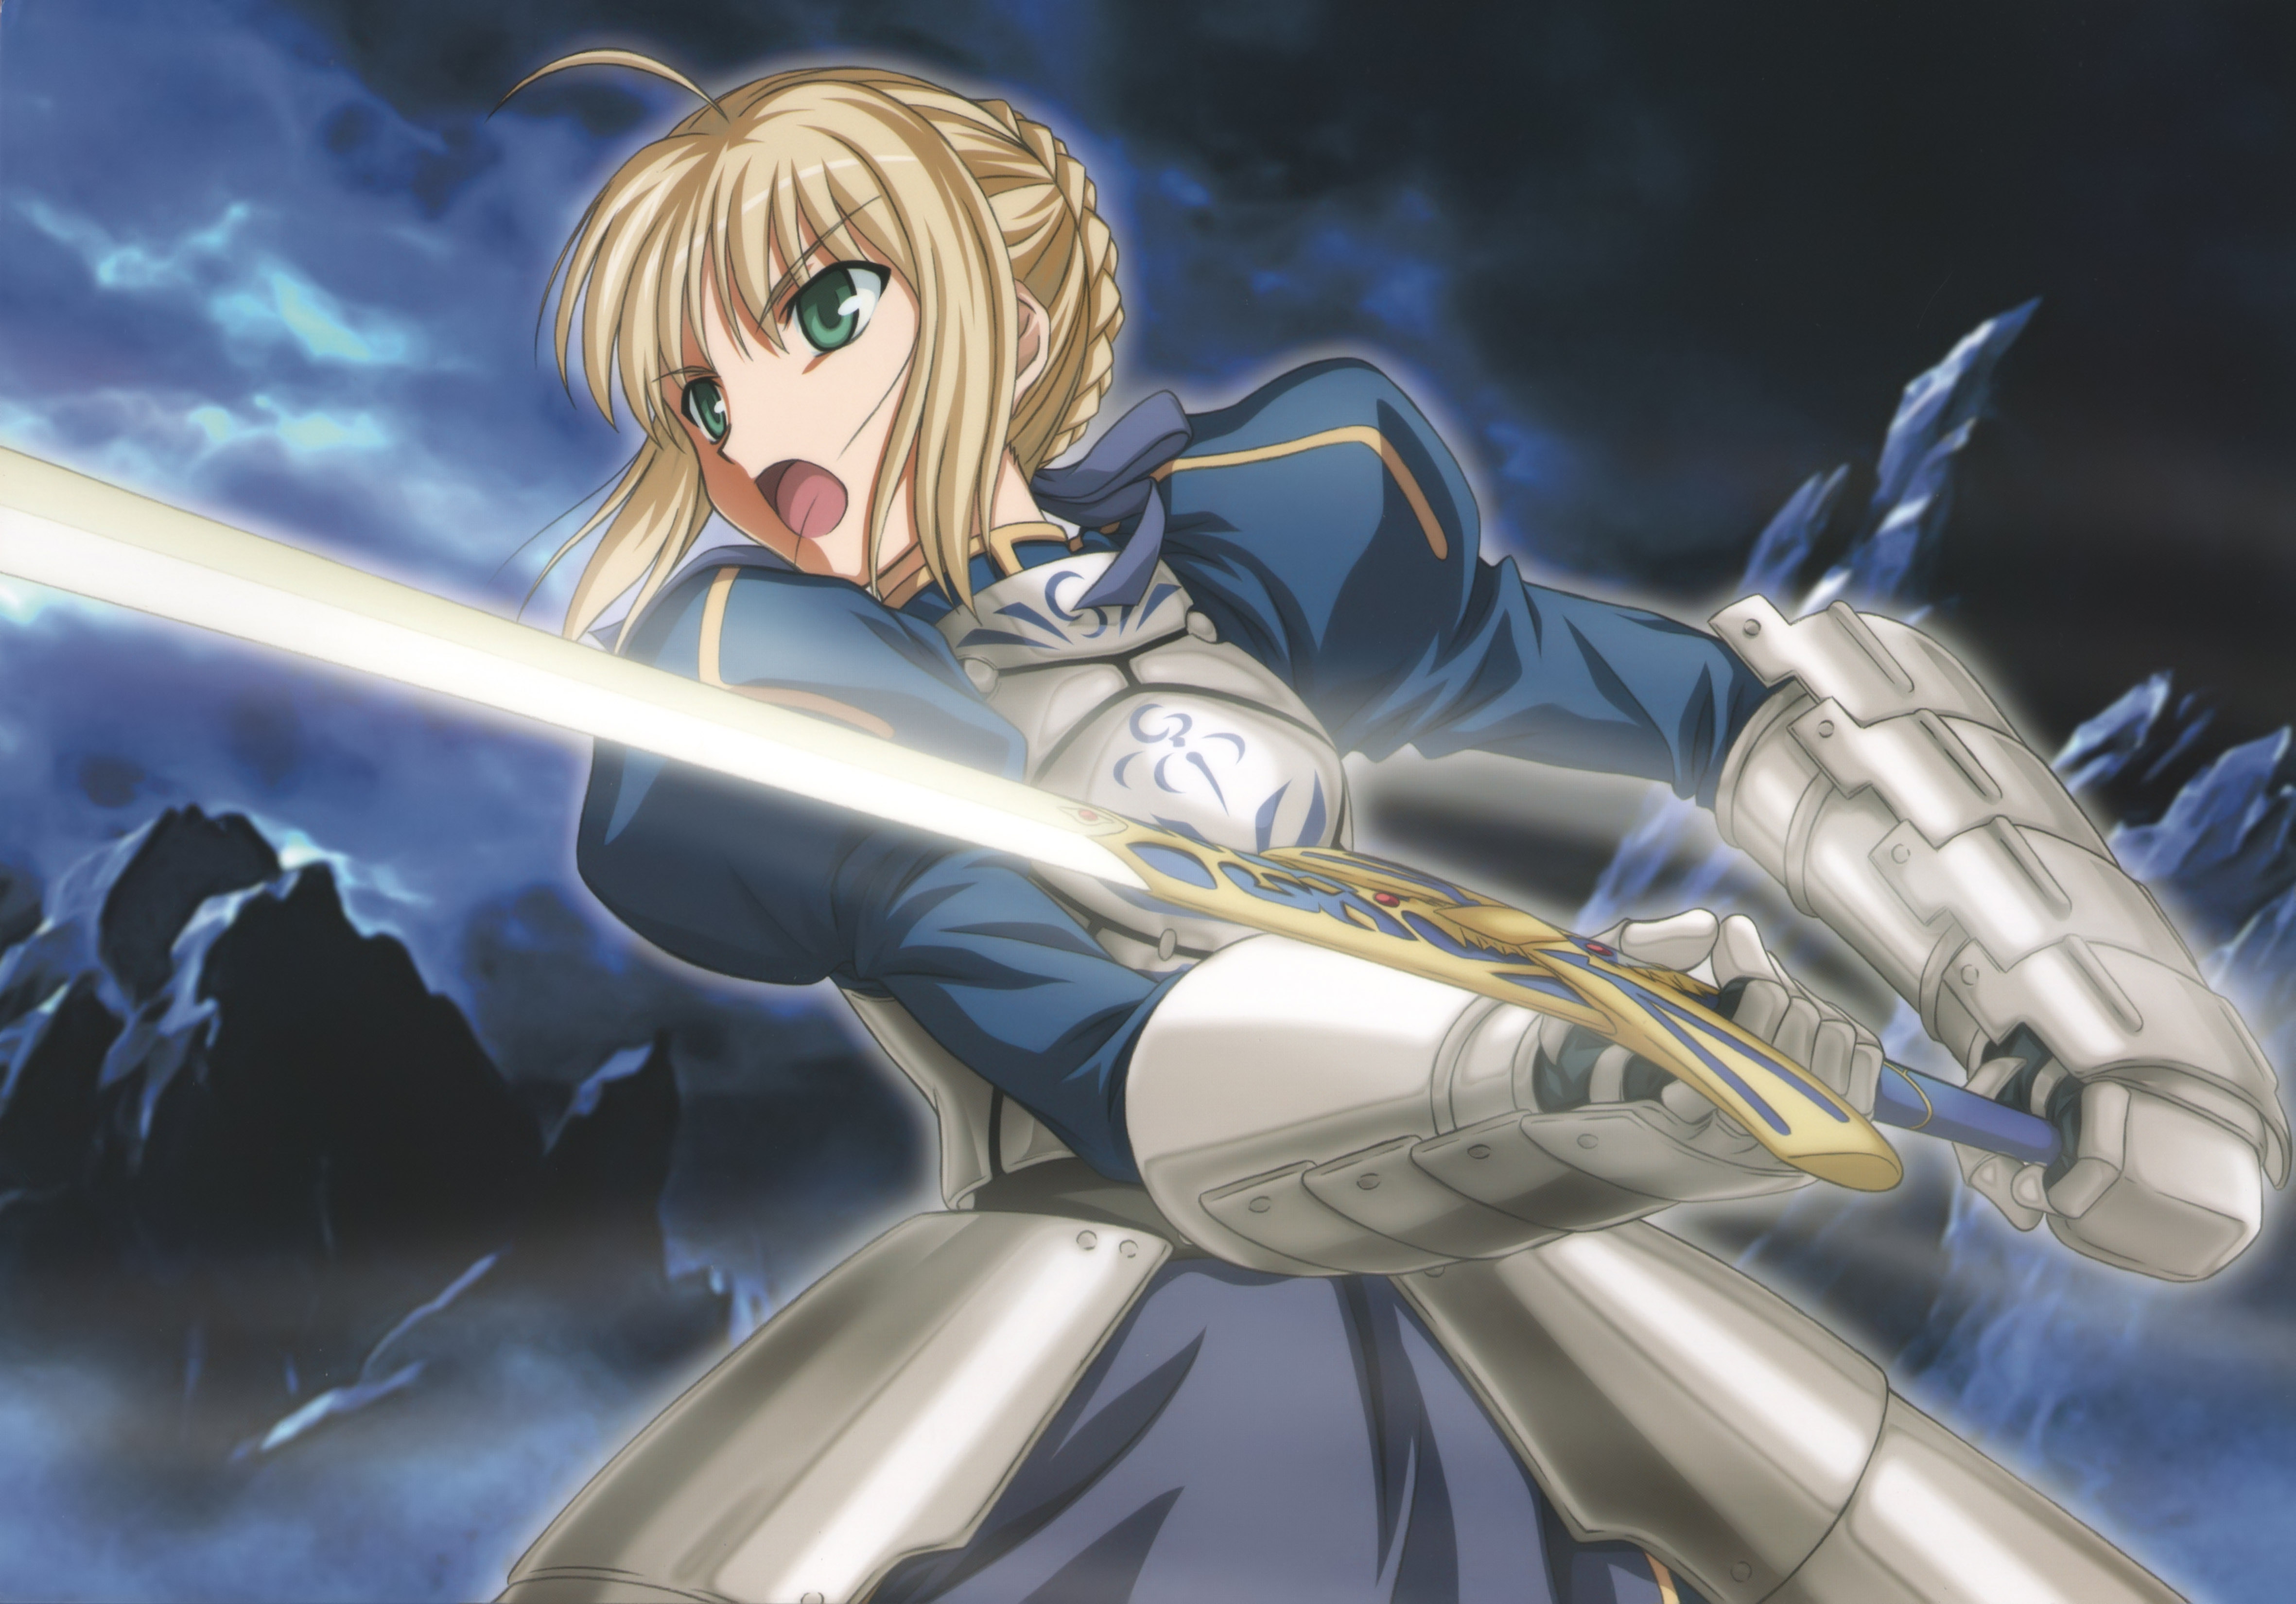 Saber Wallpapers Images Photos Pictures Backgrounds